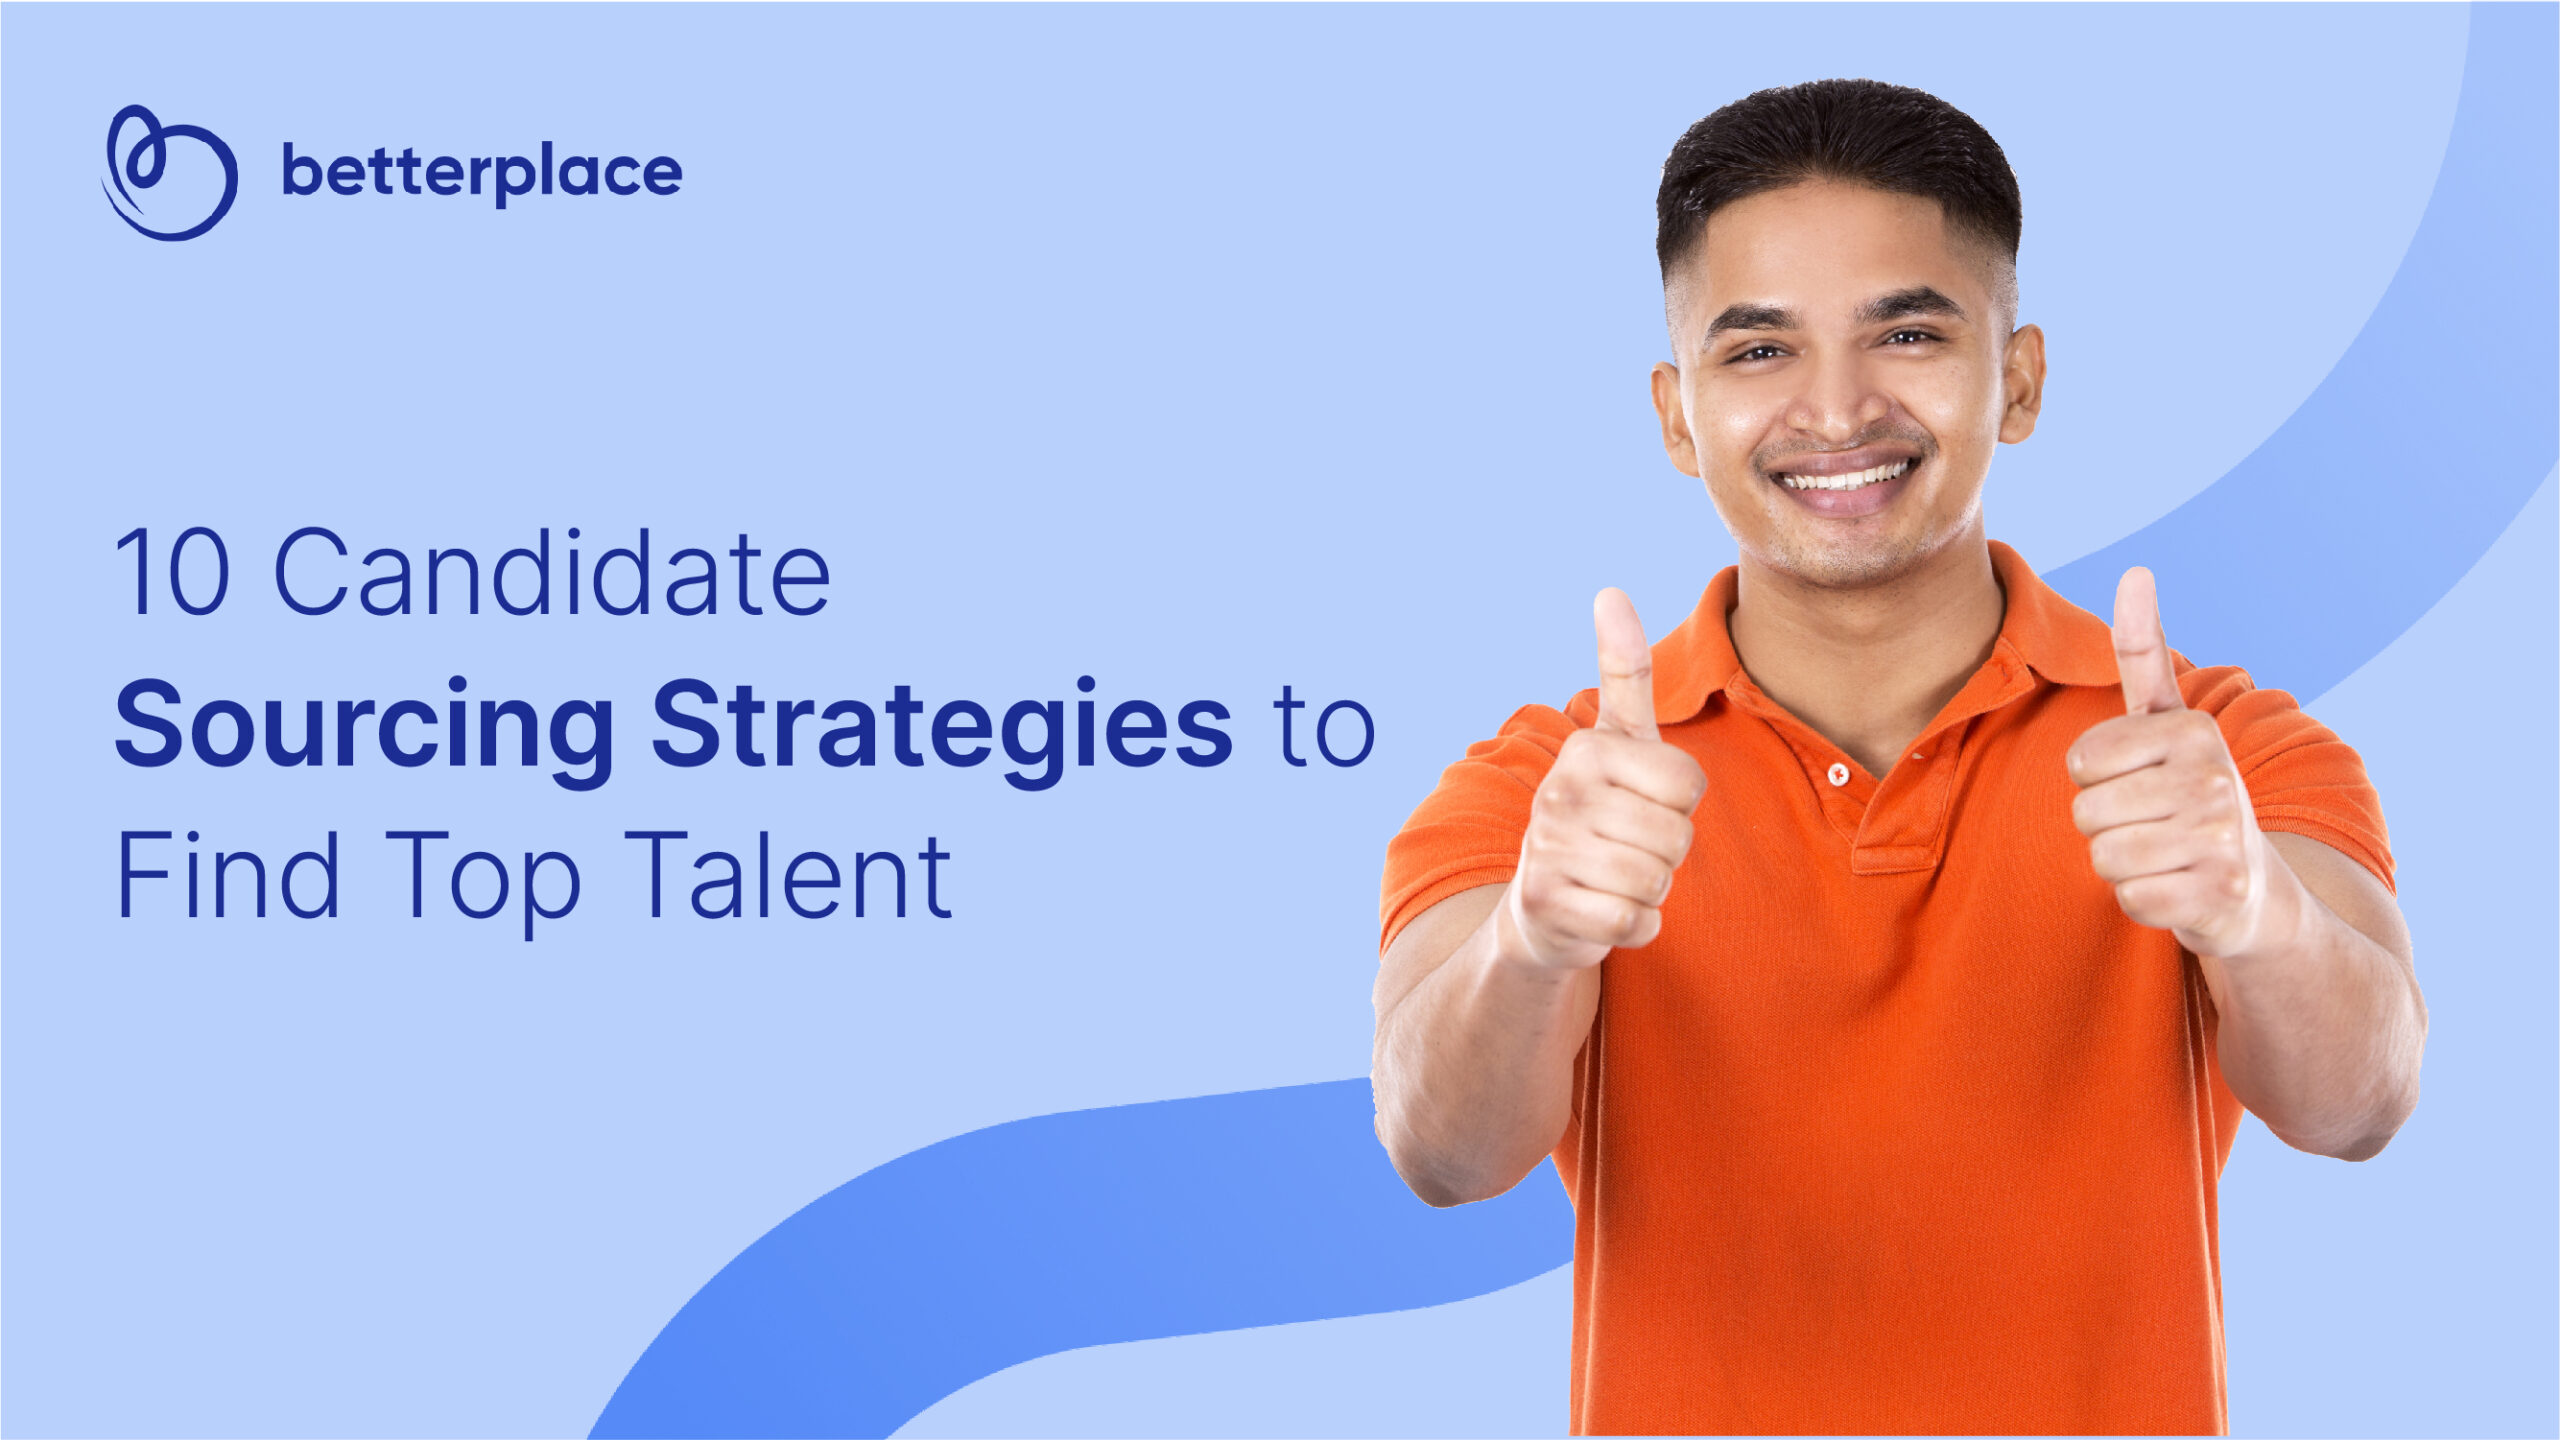 10 Candidate Sourcing Strategies to Find Top Talent